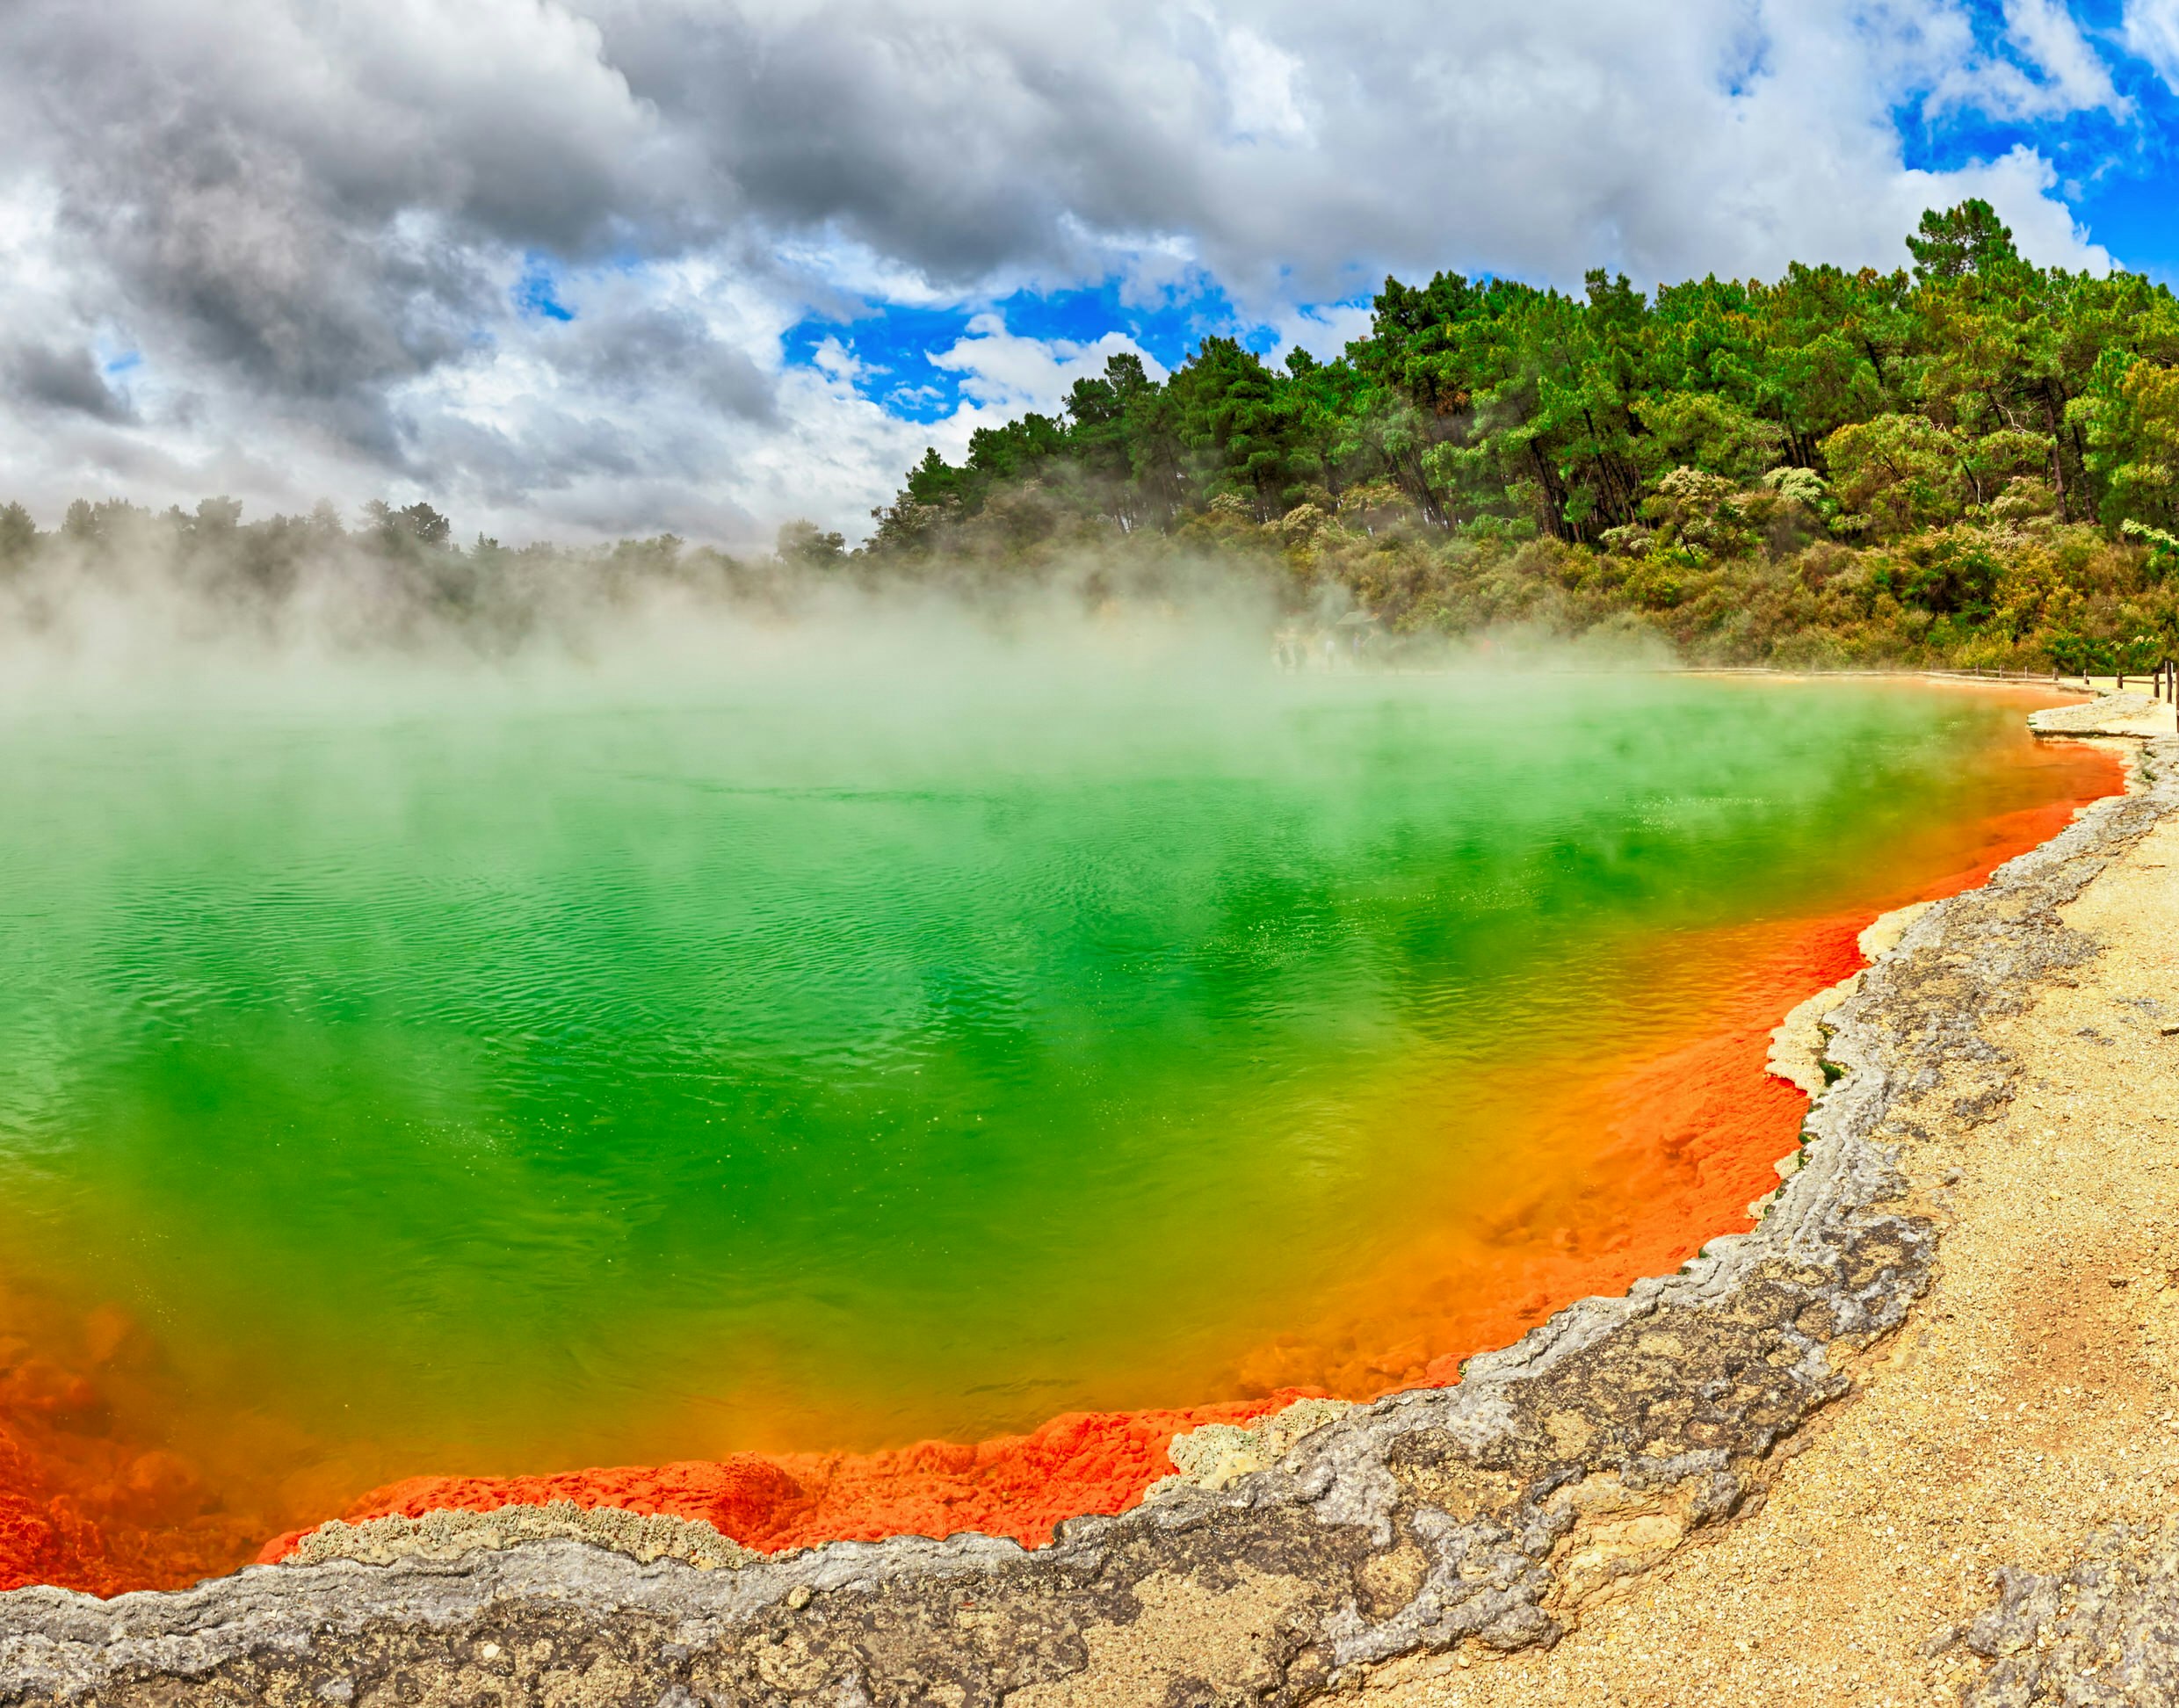 Steam rises from a geothermal pool. The bank of the pool is rocky, and the water appears to graduate in colour from orange through to green, an illusion due to the colour of the bed of the pool. In the background is a small hillock of trees and bushes.